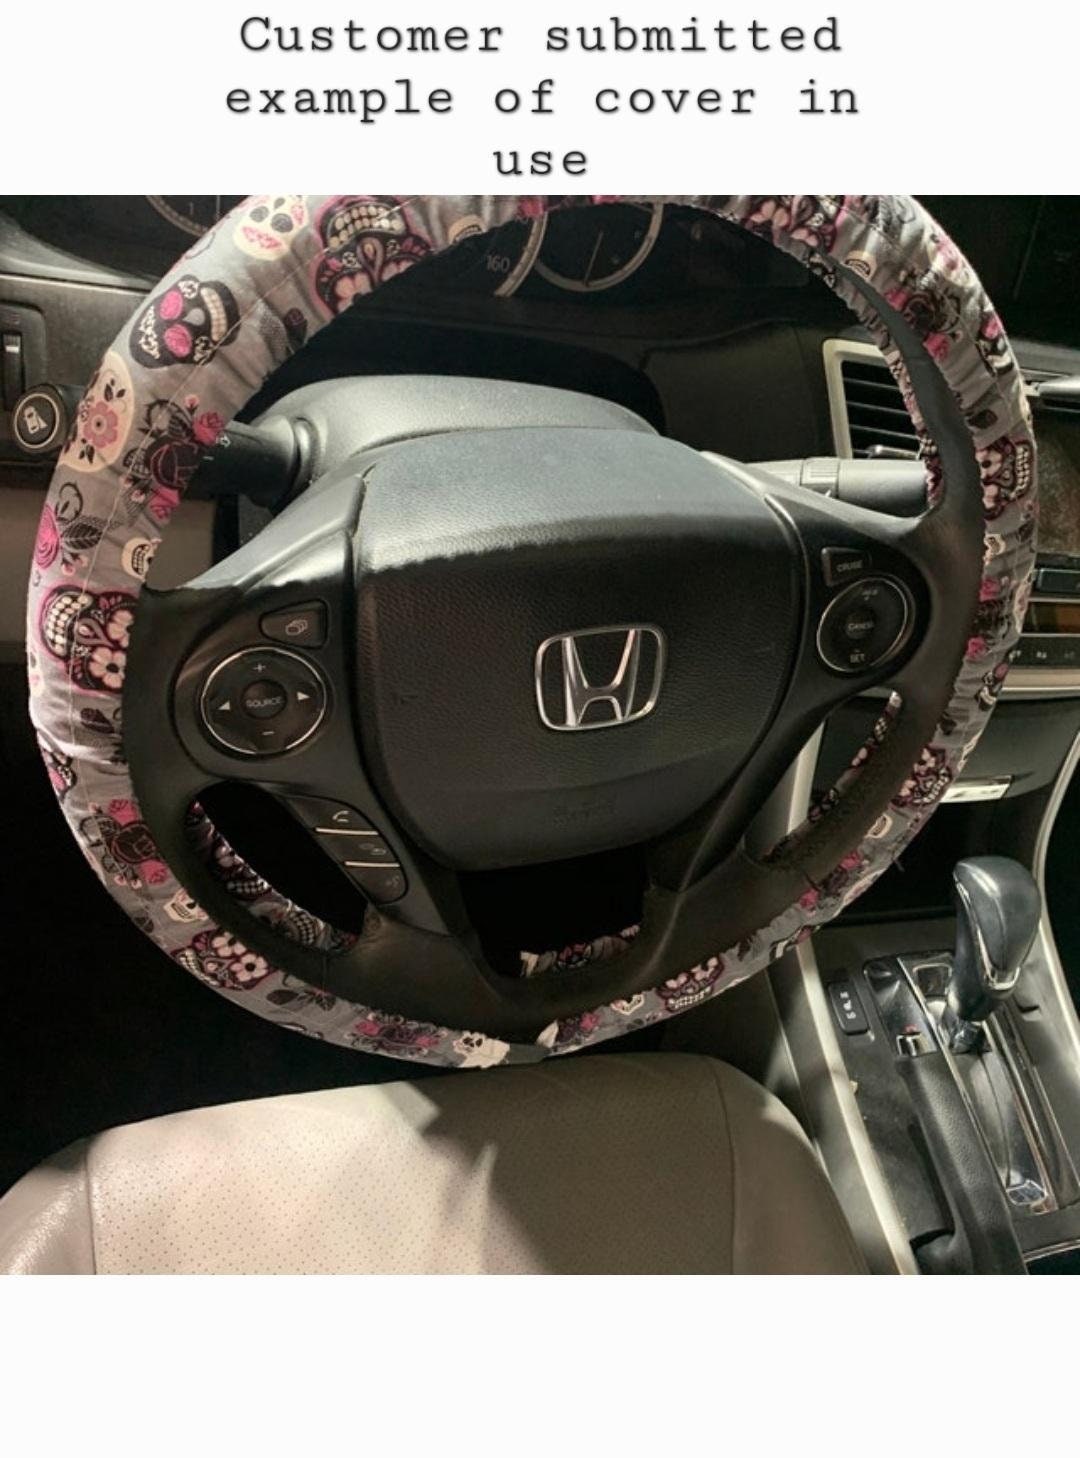 Mermaid Scales Steering Wheel Cover, 100% Cotton, Washable, Custom Car Accessories - Harlow's Store and Garden Gifts